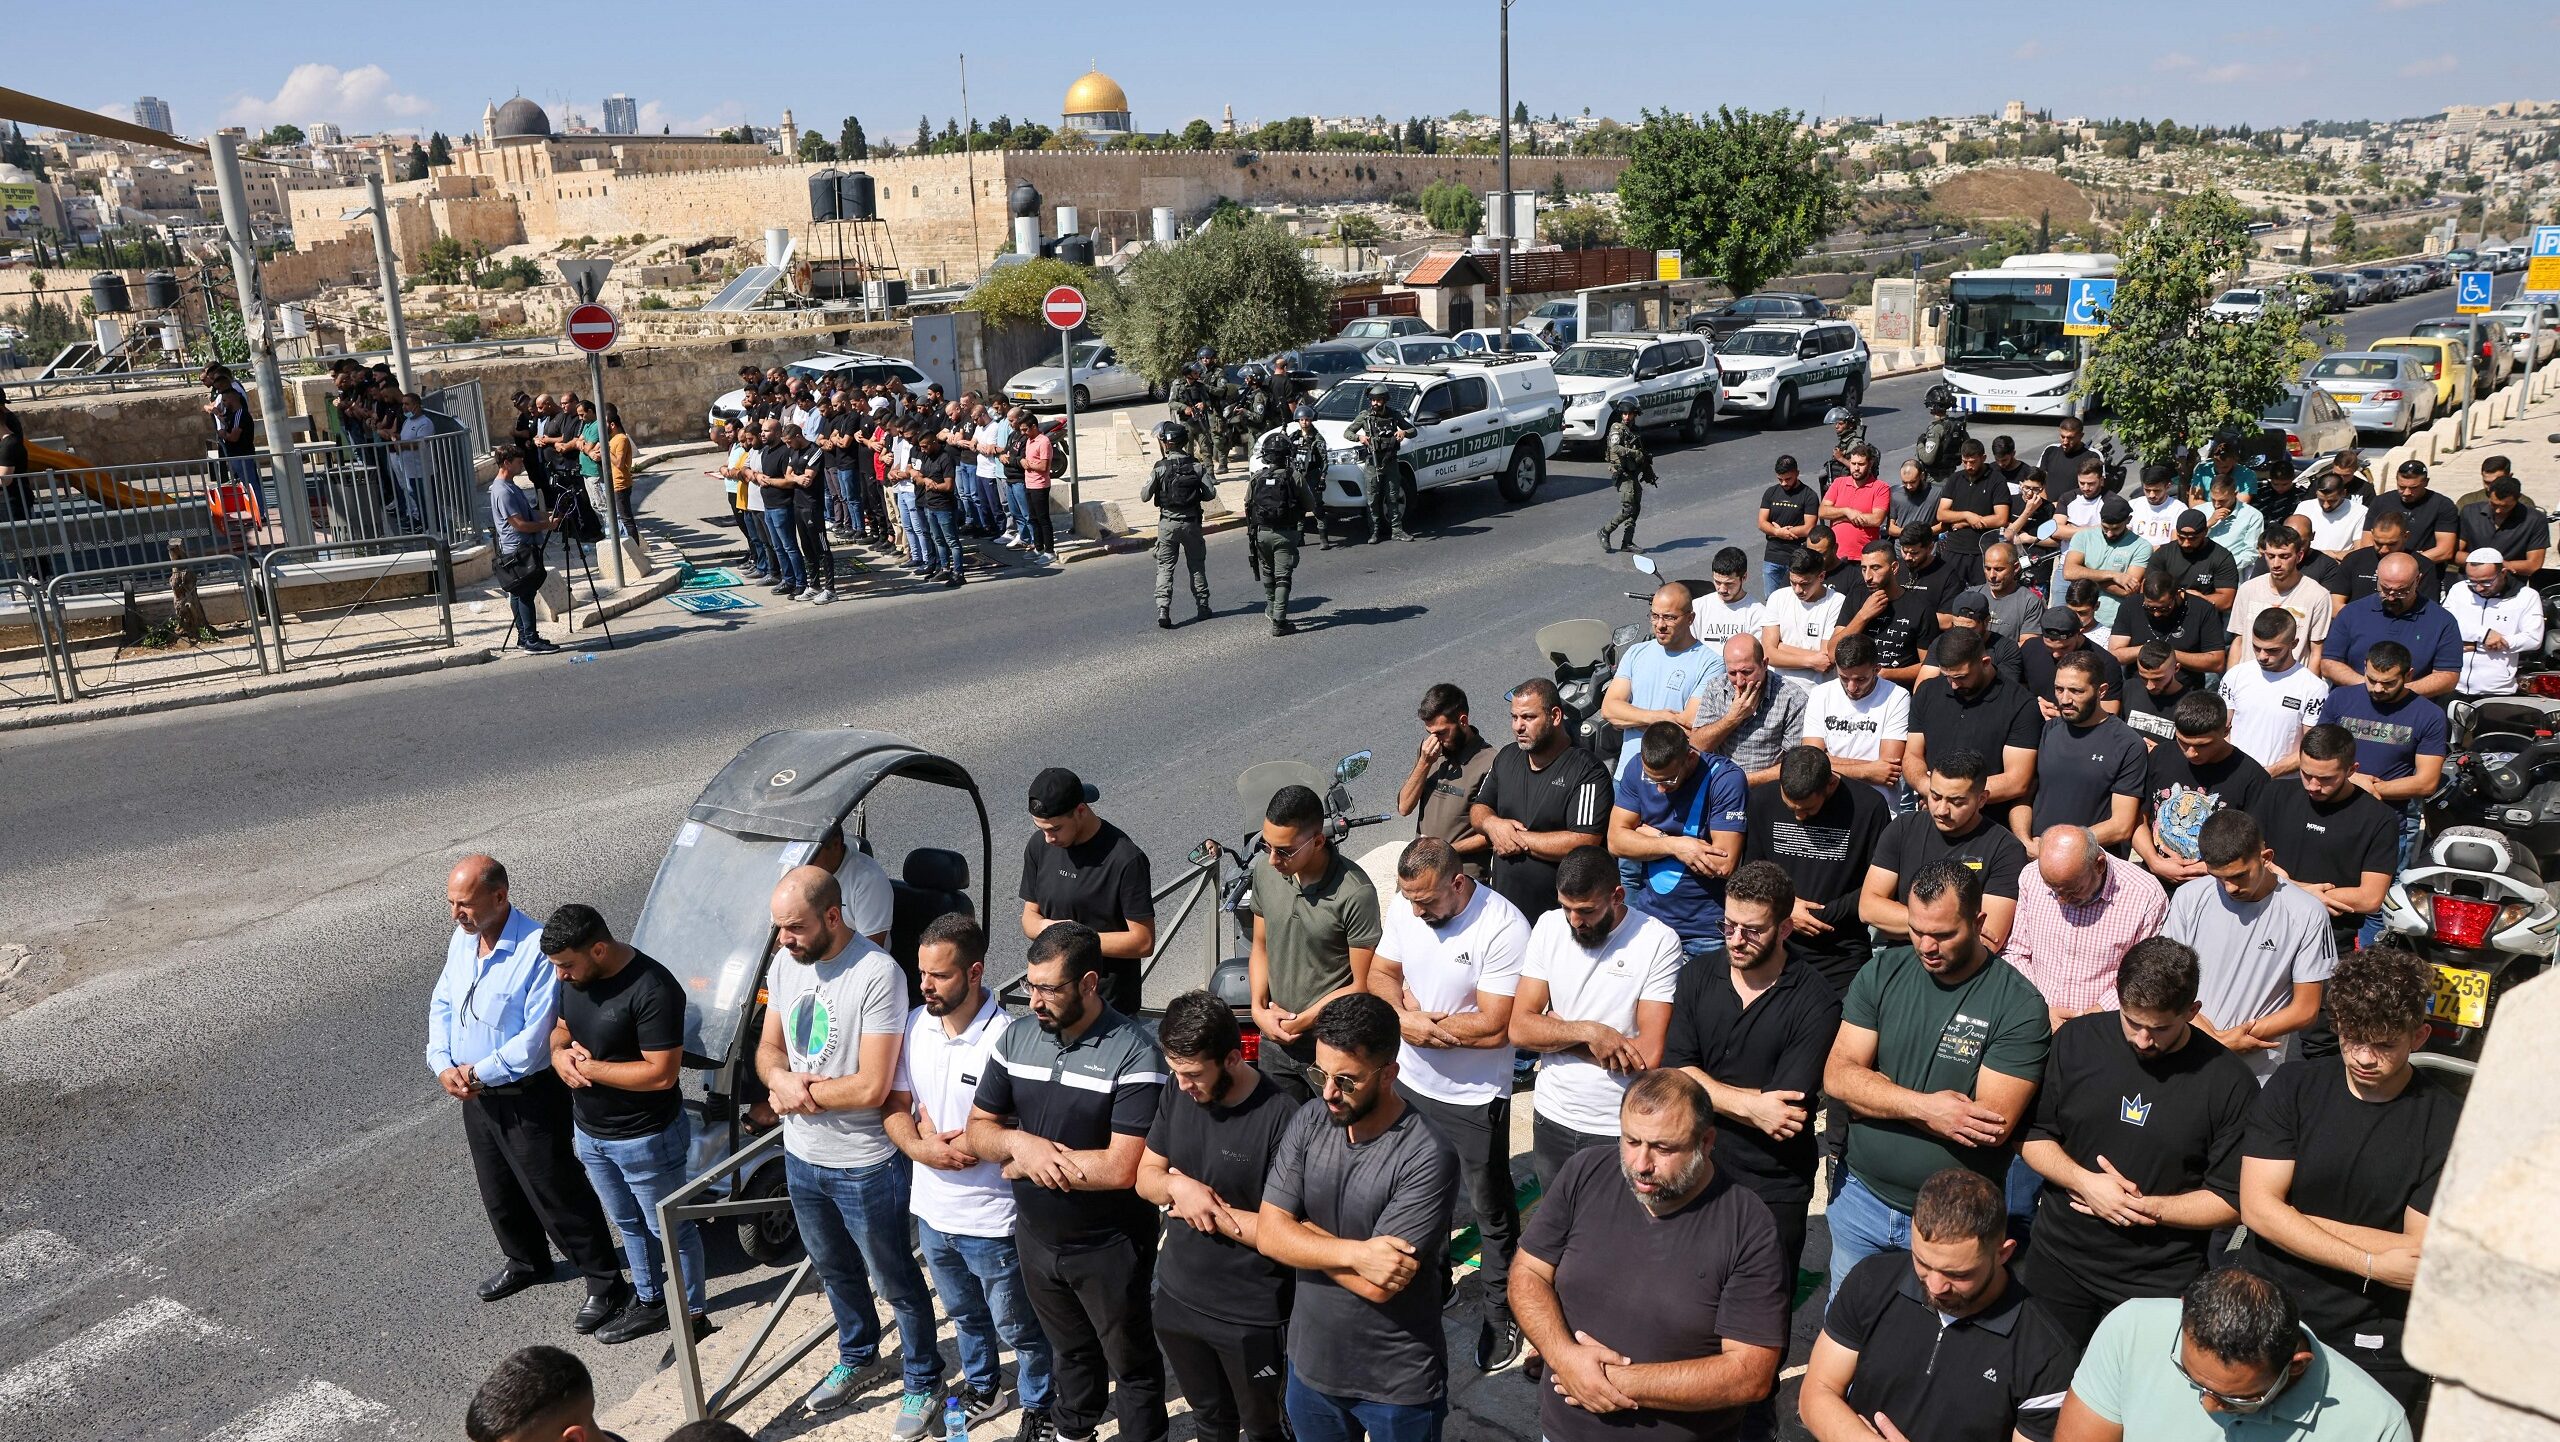 Tensions Flare in East Jerusalem as Israeli Forces Restrict Al-Aqsa Access